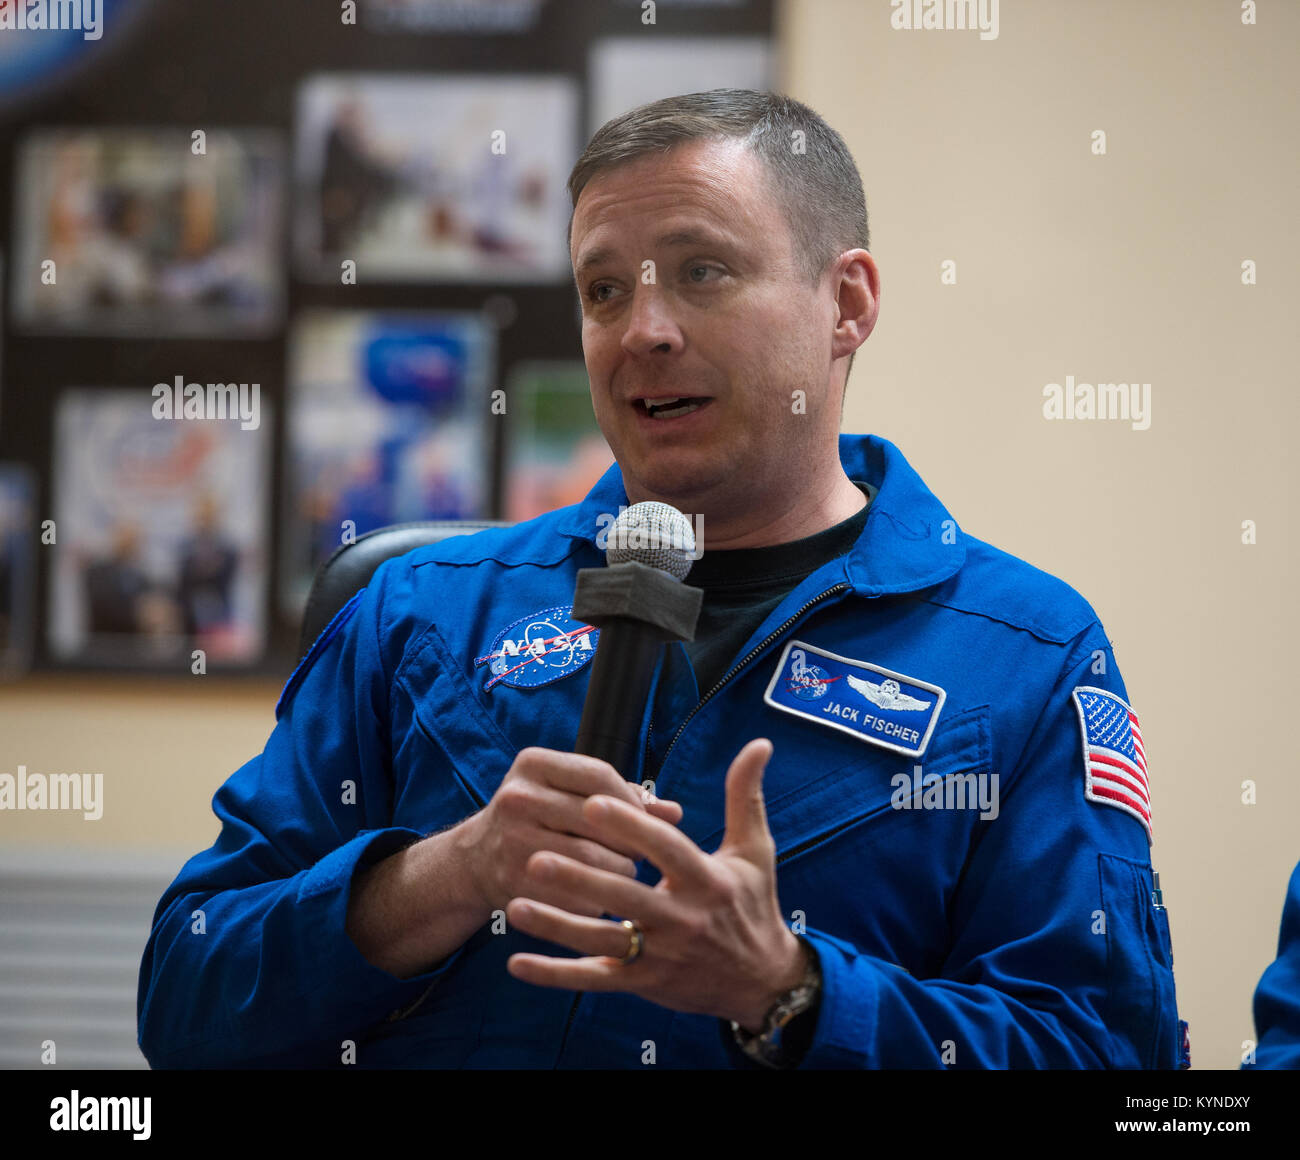 Expedition 51 Flight Engineer Jack Fischer of NASA, answers a question during a press conference on Wednesday, April 19, 2017, at the Cosmonaut Hotel in Baikonur, Kazakhstan. Launch of the Soyuz rocket is scheduled for April 20 and will carry Fischer and Soyuz Commander Fyodor Yurchikhin of Roscosmos into orbit to begin their four and a half month mission on the International Space Station. Photo Credit: (NASA/Aubrey Gemignani) Stock Photo